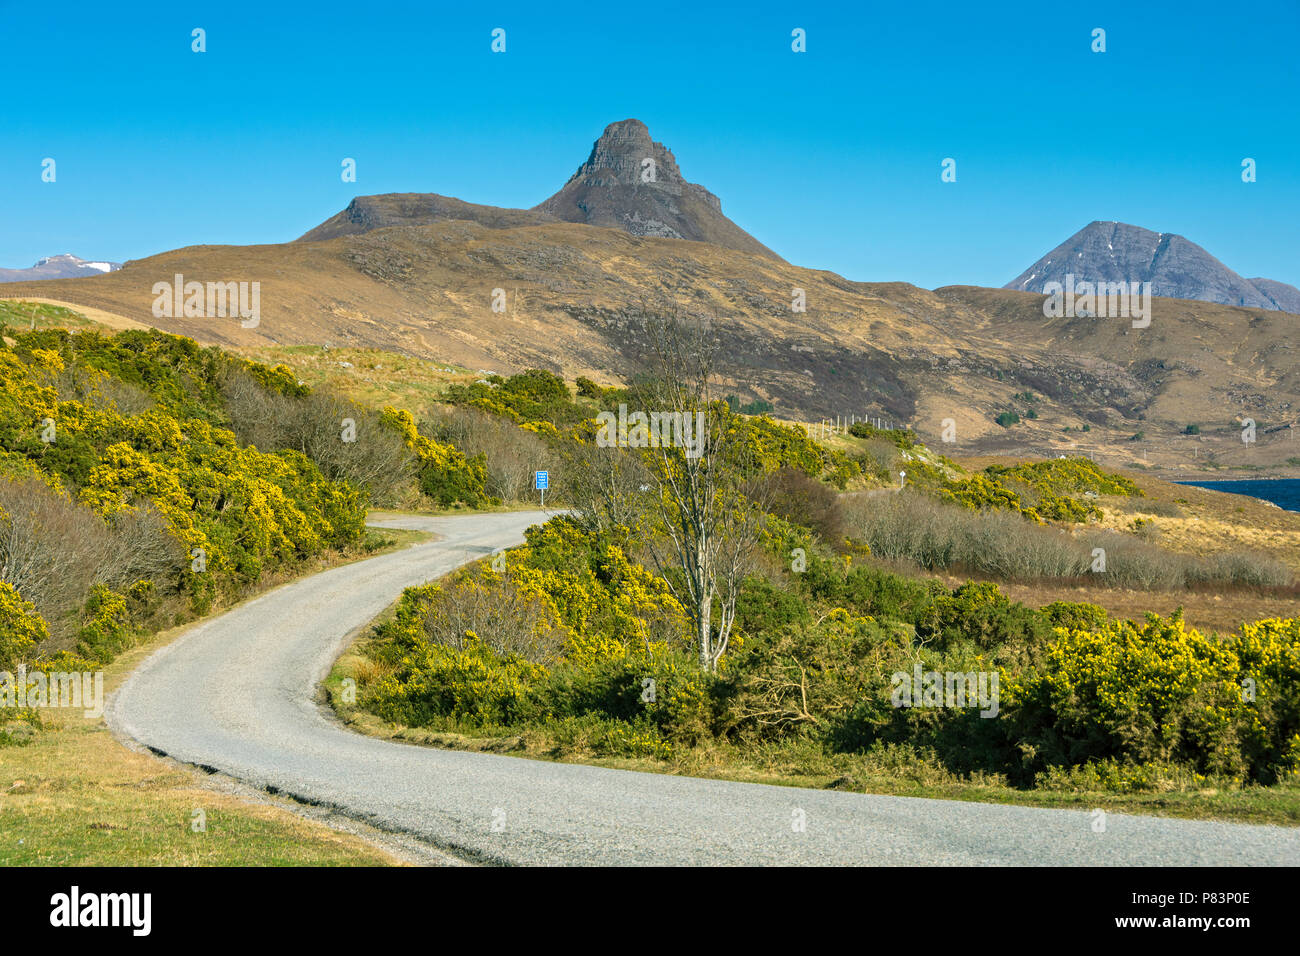 Stac Pollaidh (Stac Polly) and Cùl Beag from the single track road near Loch Bad a' Ghaill, Coigach, Sutherland, Highland Region, Scotland, UK Stock Photo